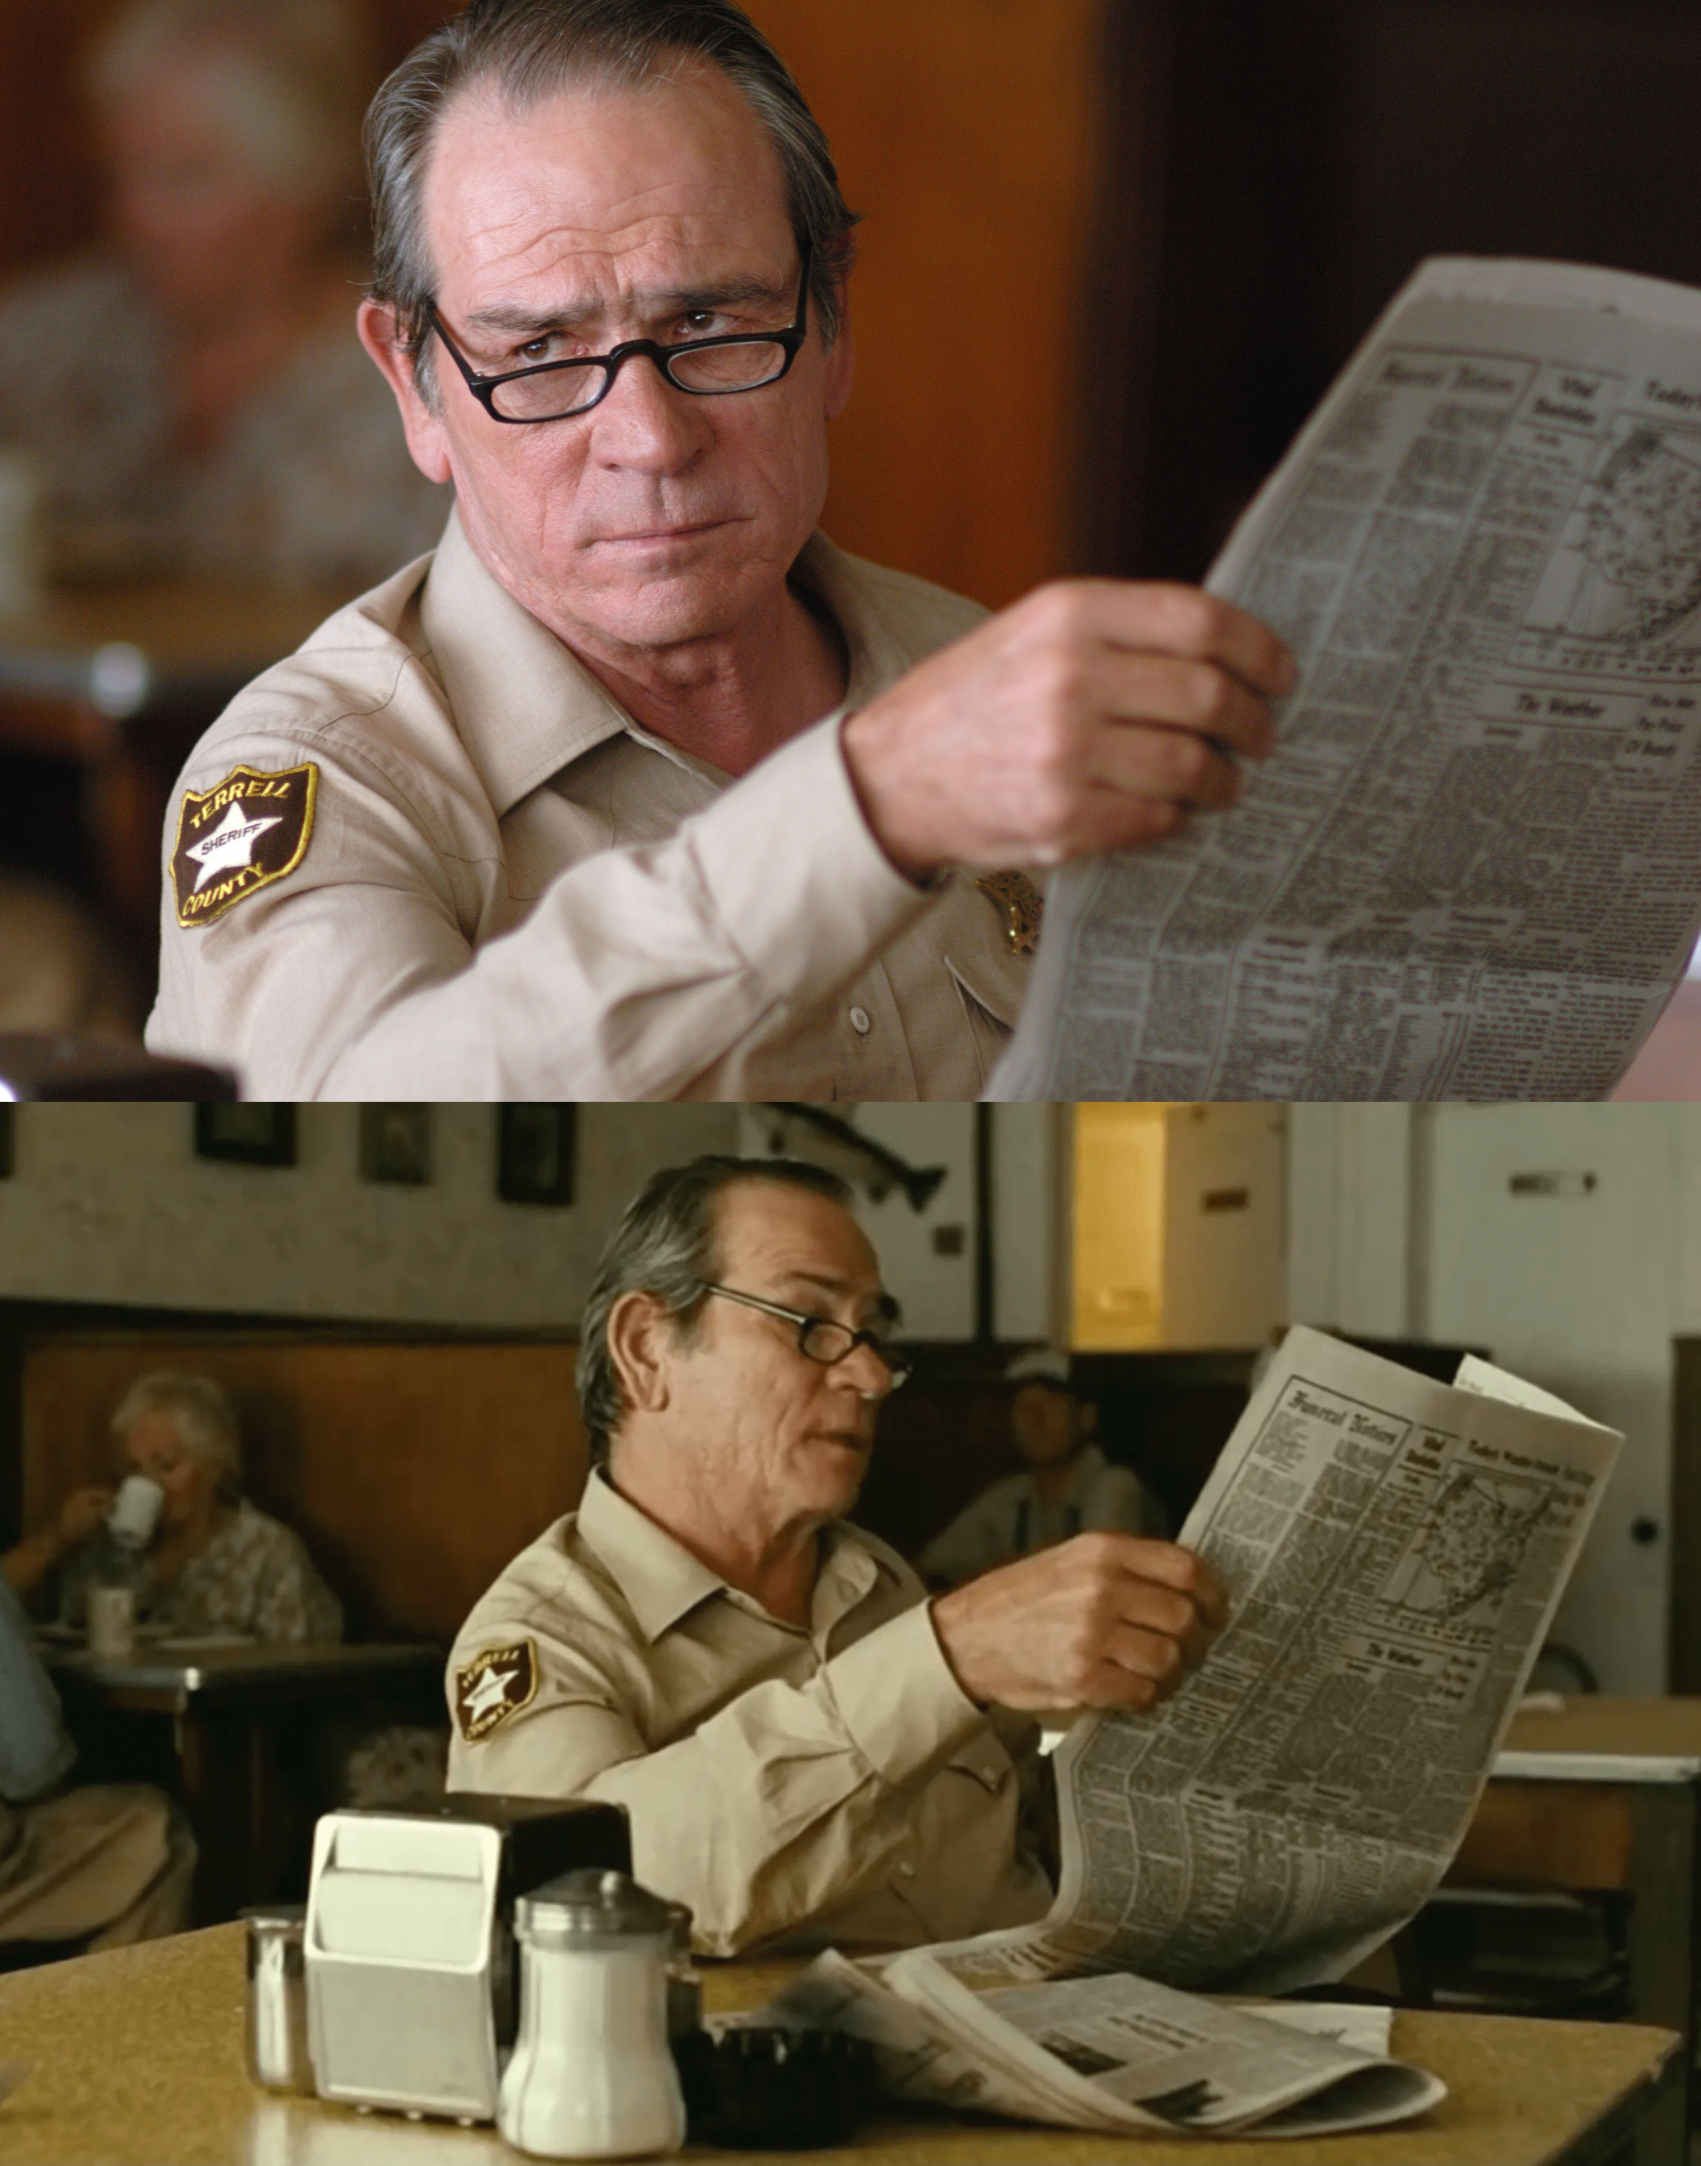 High Quality no country for old men, newspaper look HQ [ d-_-b TEMPLATE ] Blank Meme Template